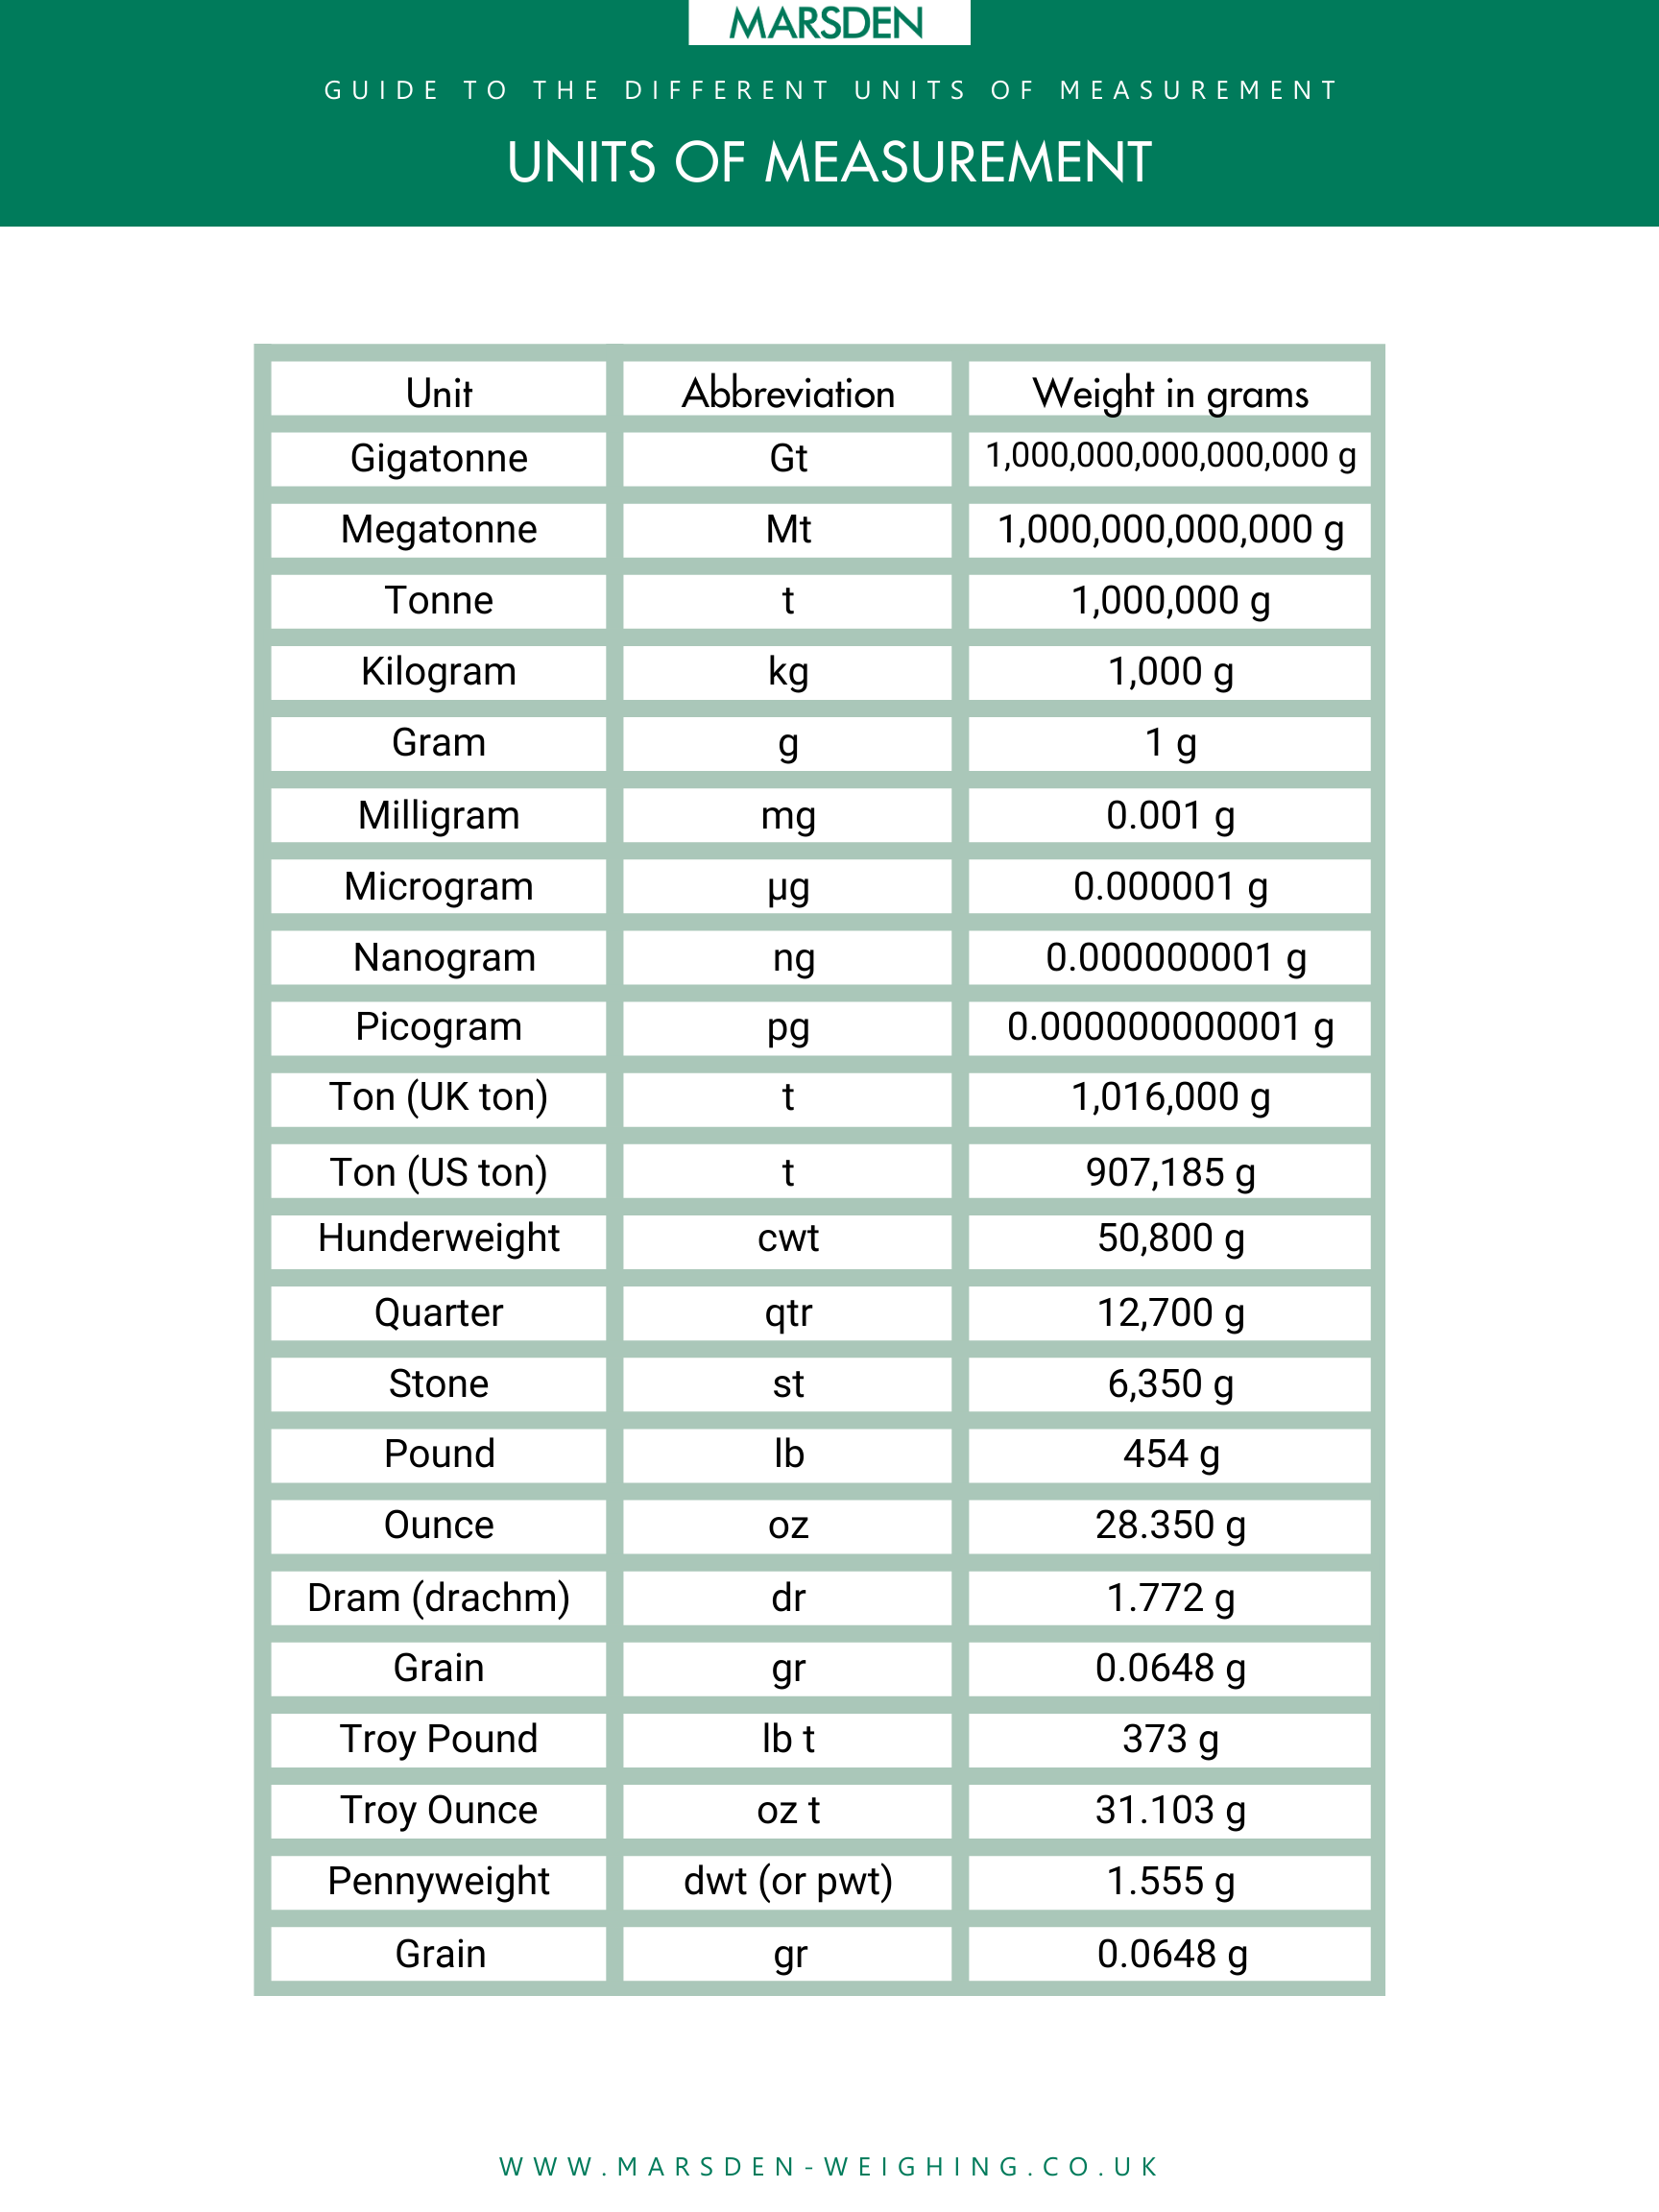 Units Of Measurement Guide Free Infographic Marsden Weighing